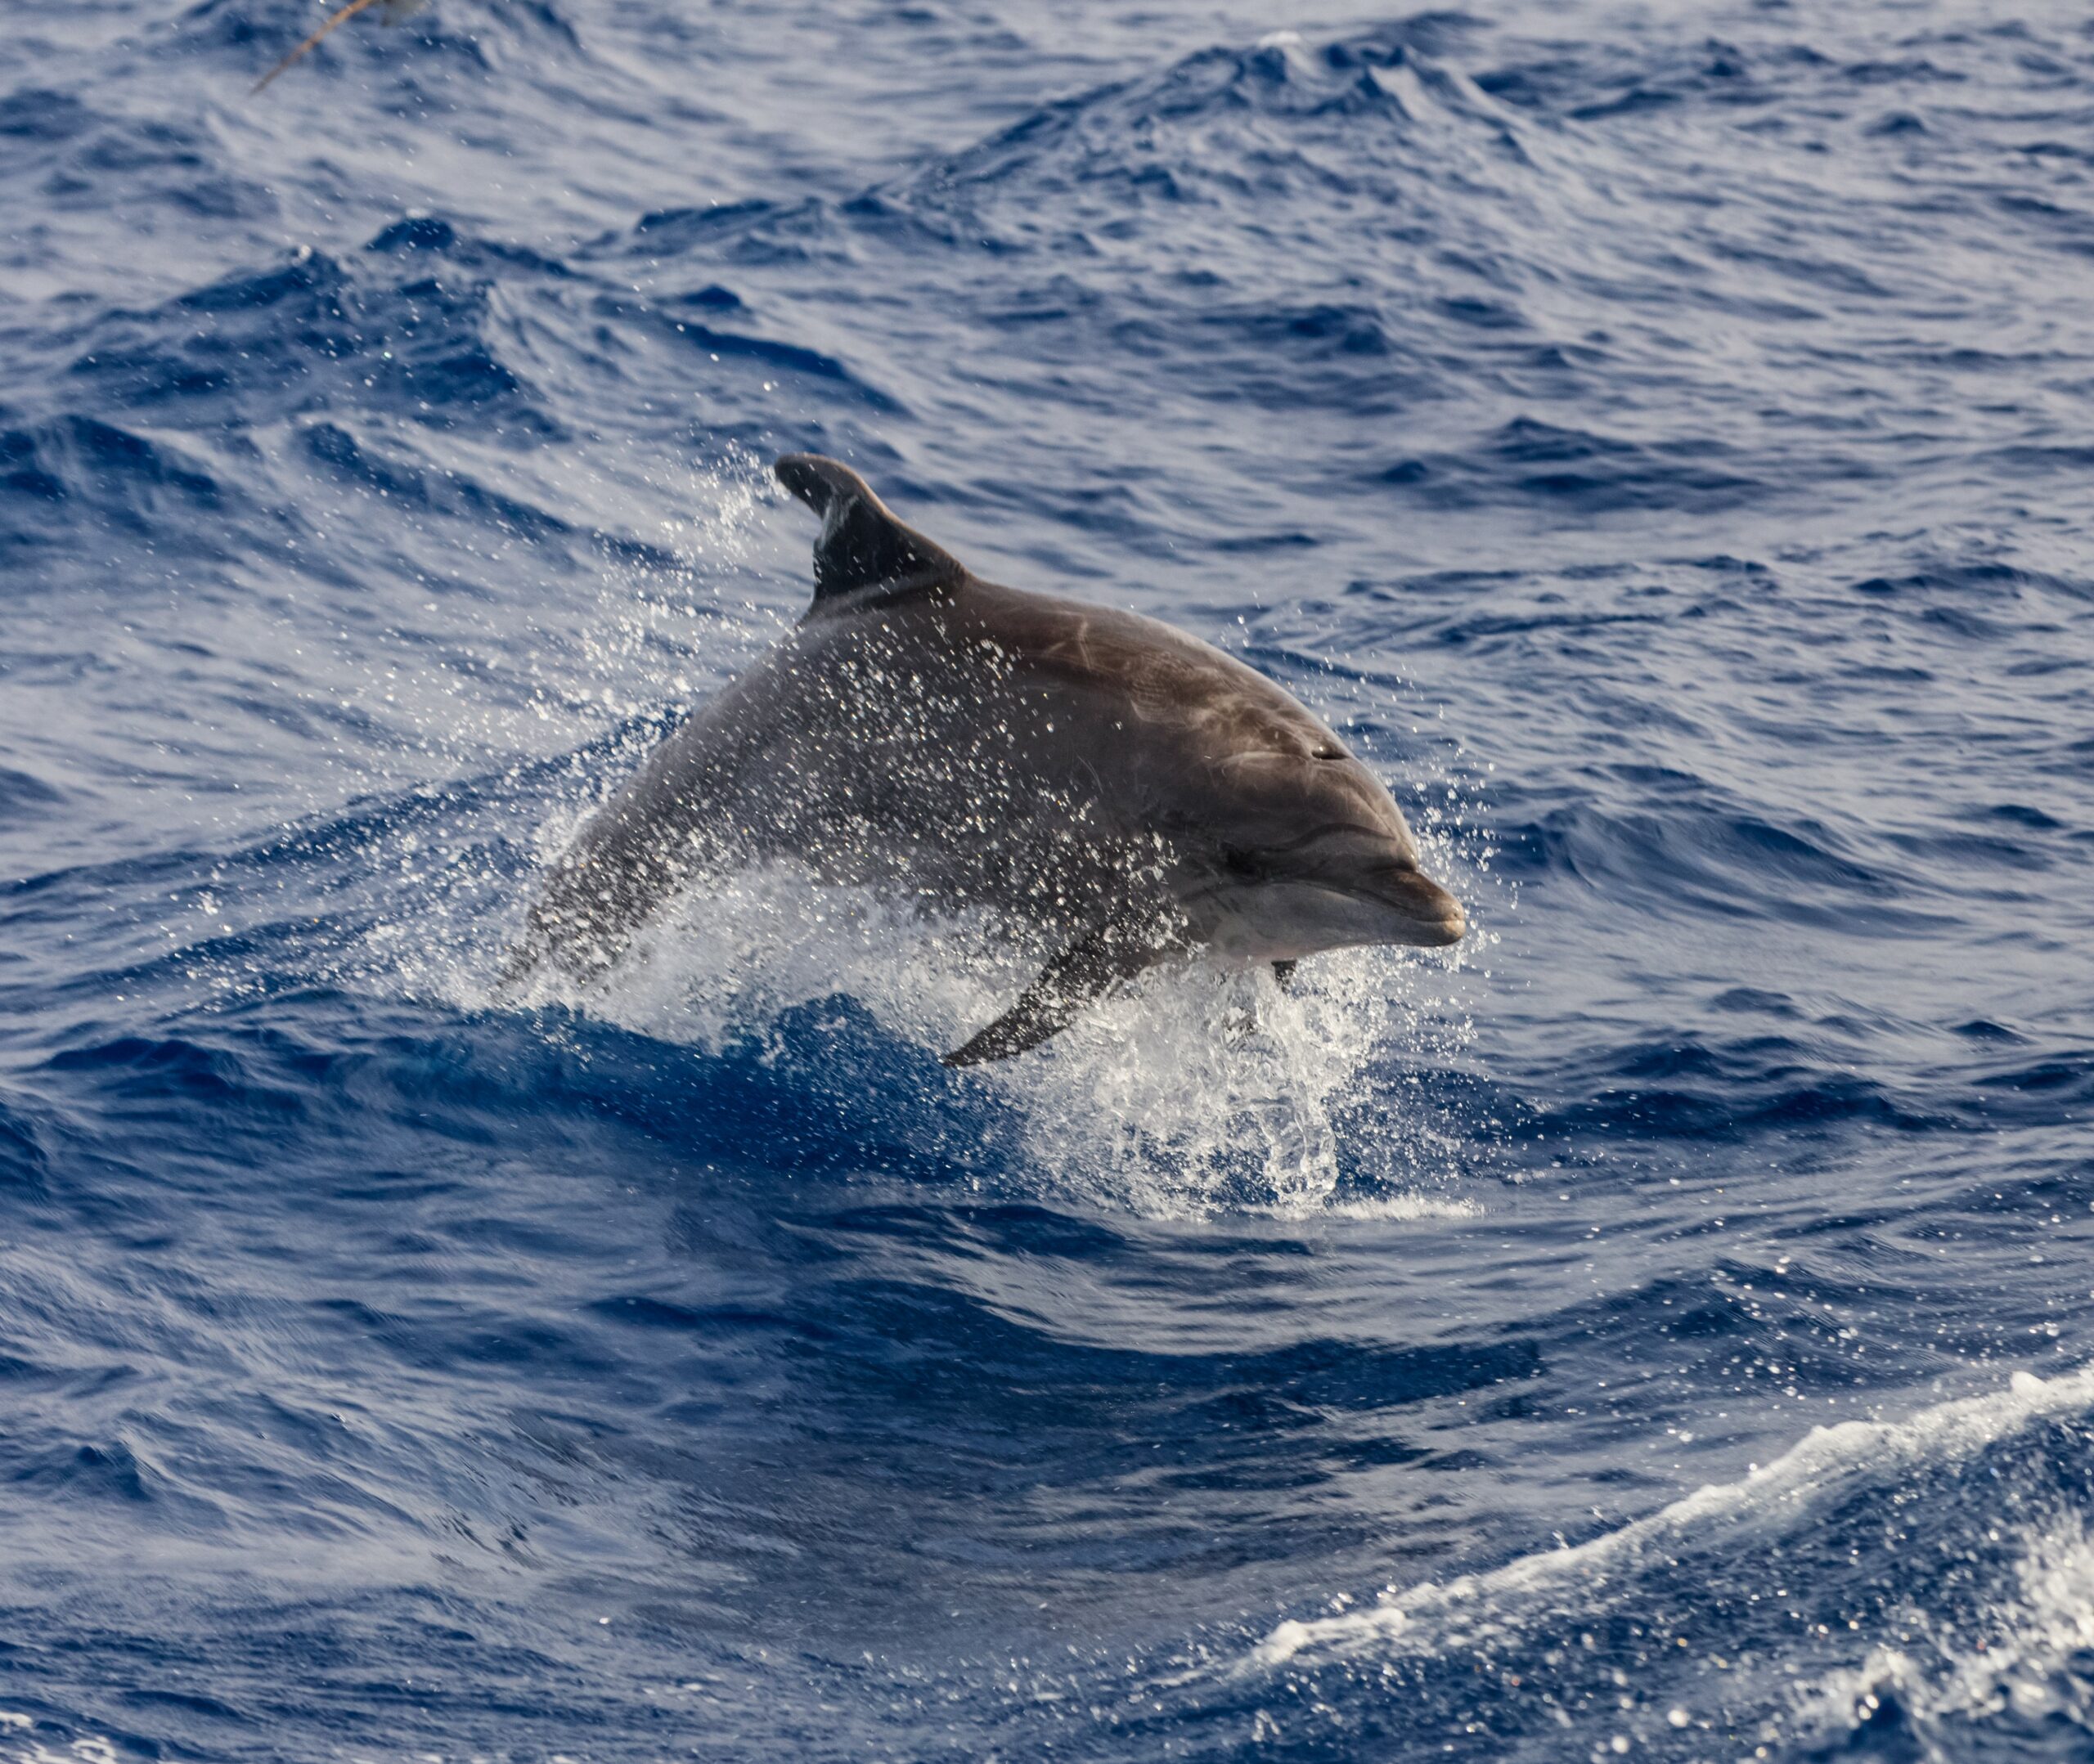 This is a photograph of a grey dolphin swimming in the blue ocean. Dolphins are commonly seen swimming in the Woodman Point beach.